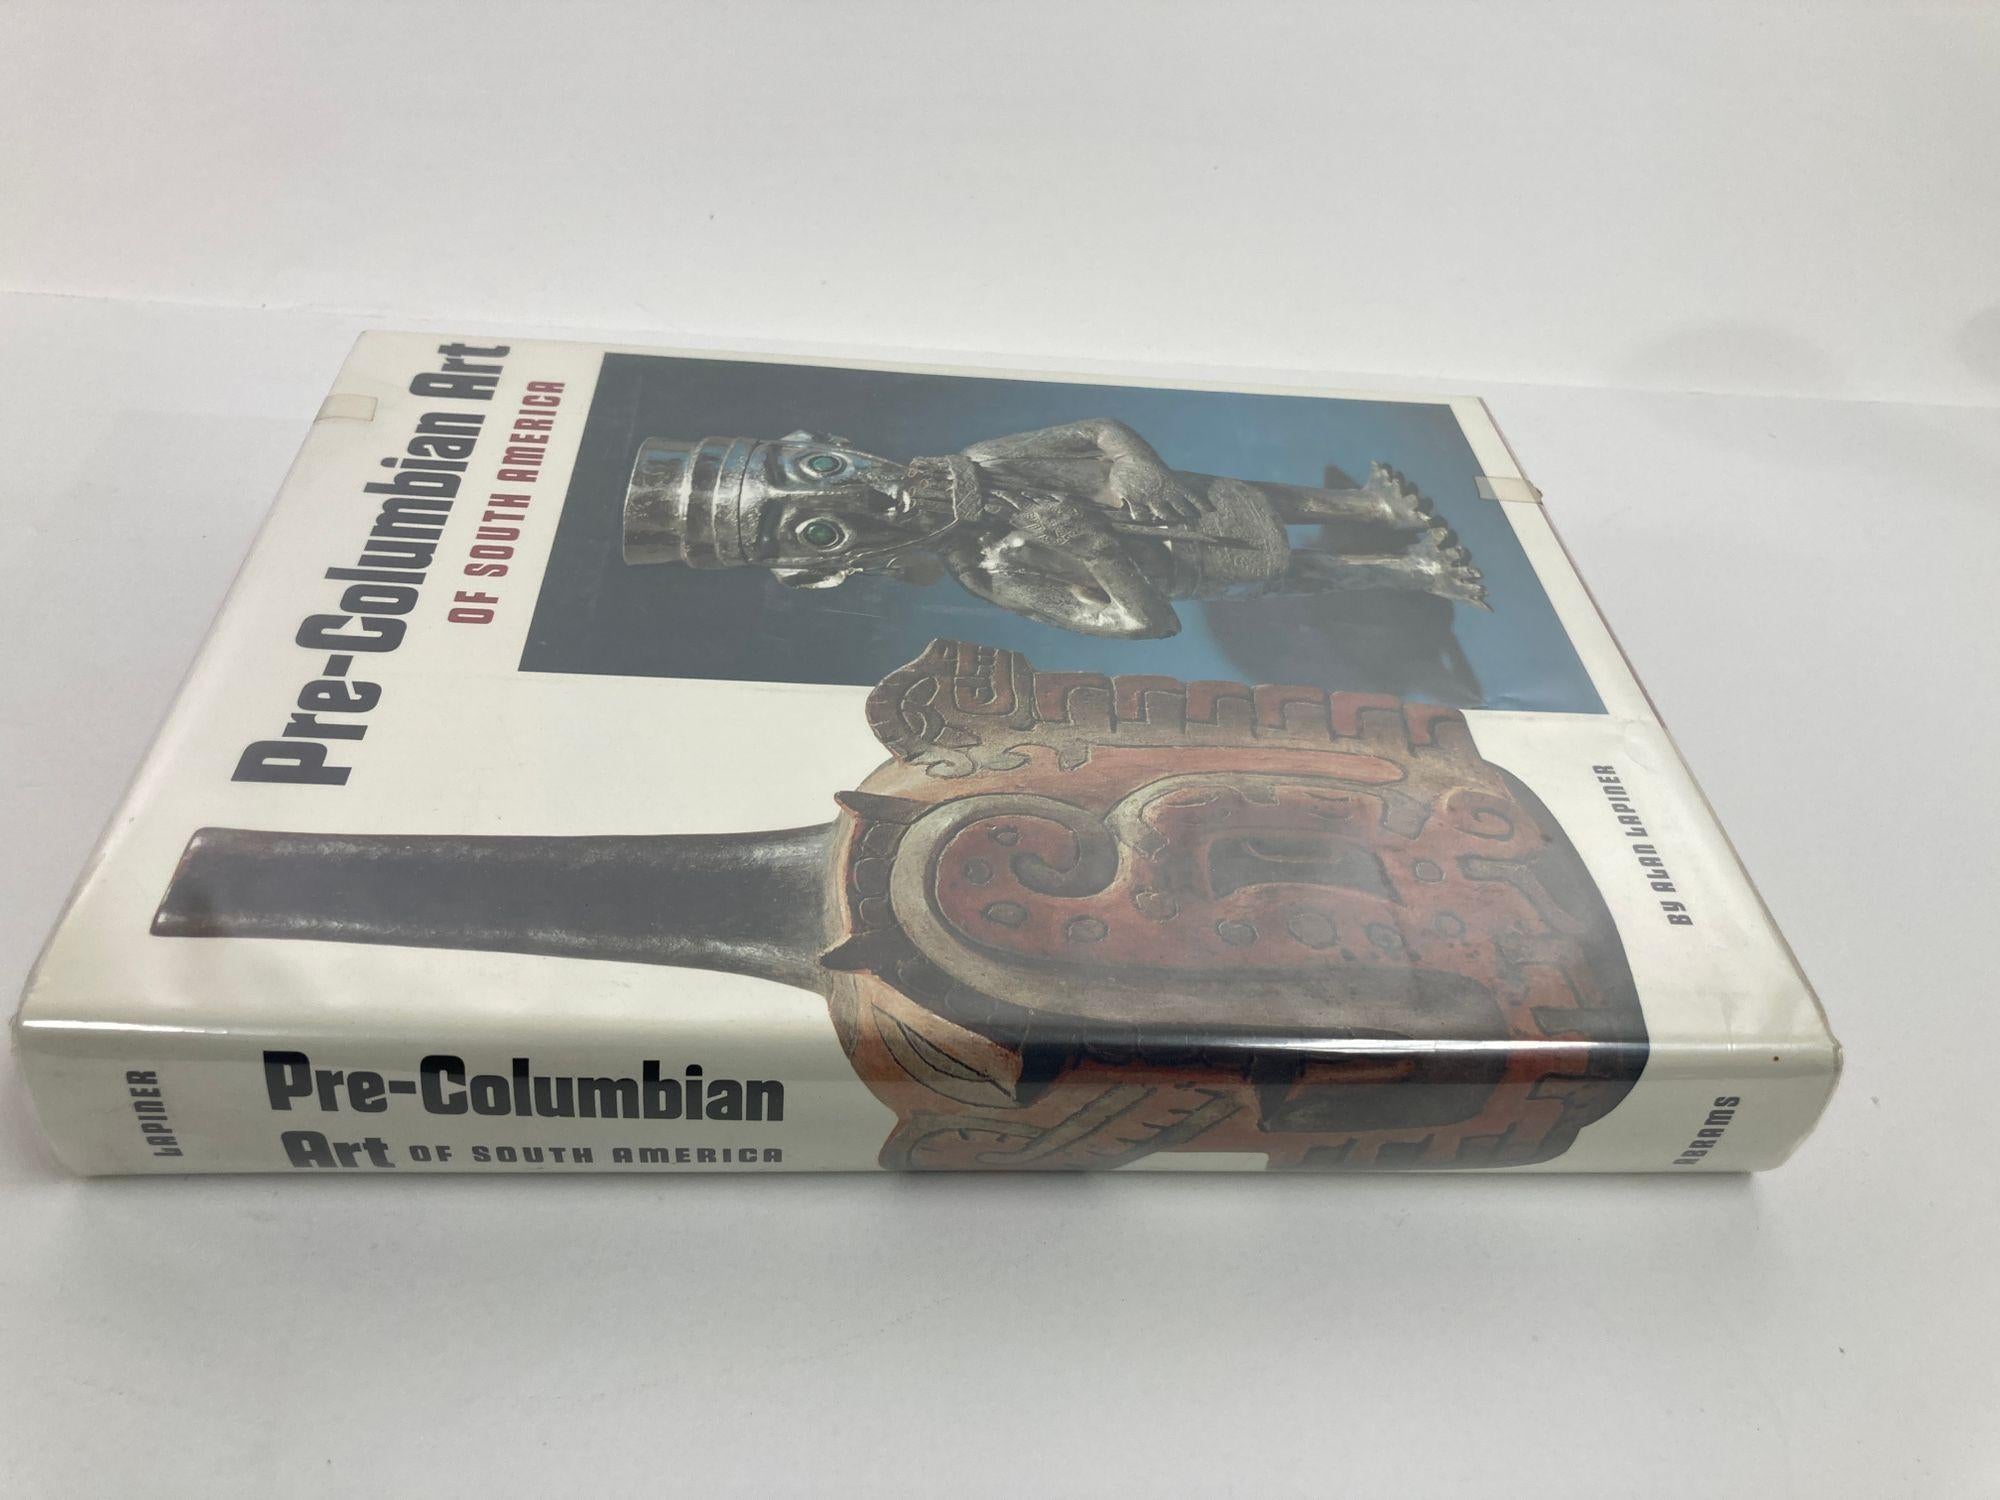 Pre-Columbian Pre Columbian Art of South America Hardcover 1976 1st Edition For Sale